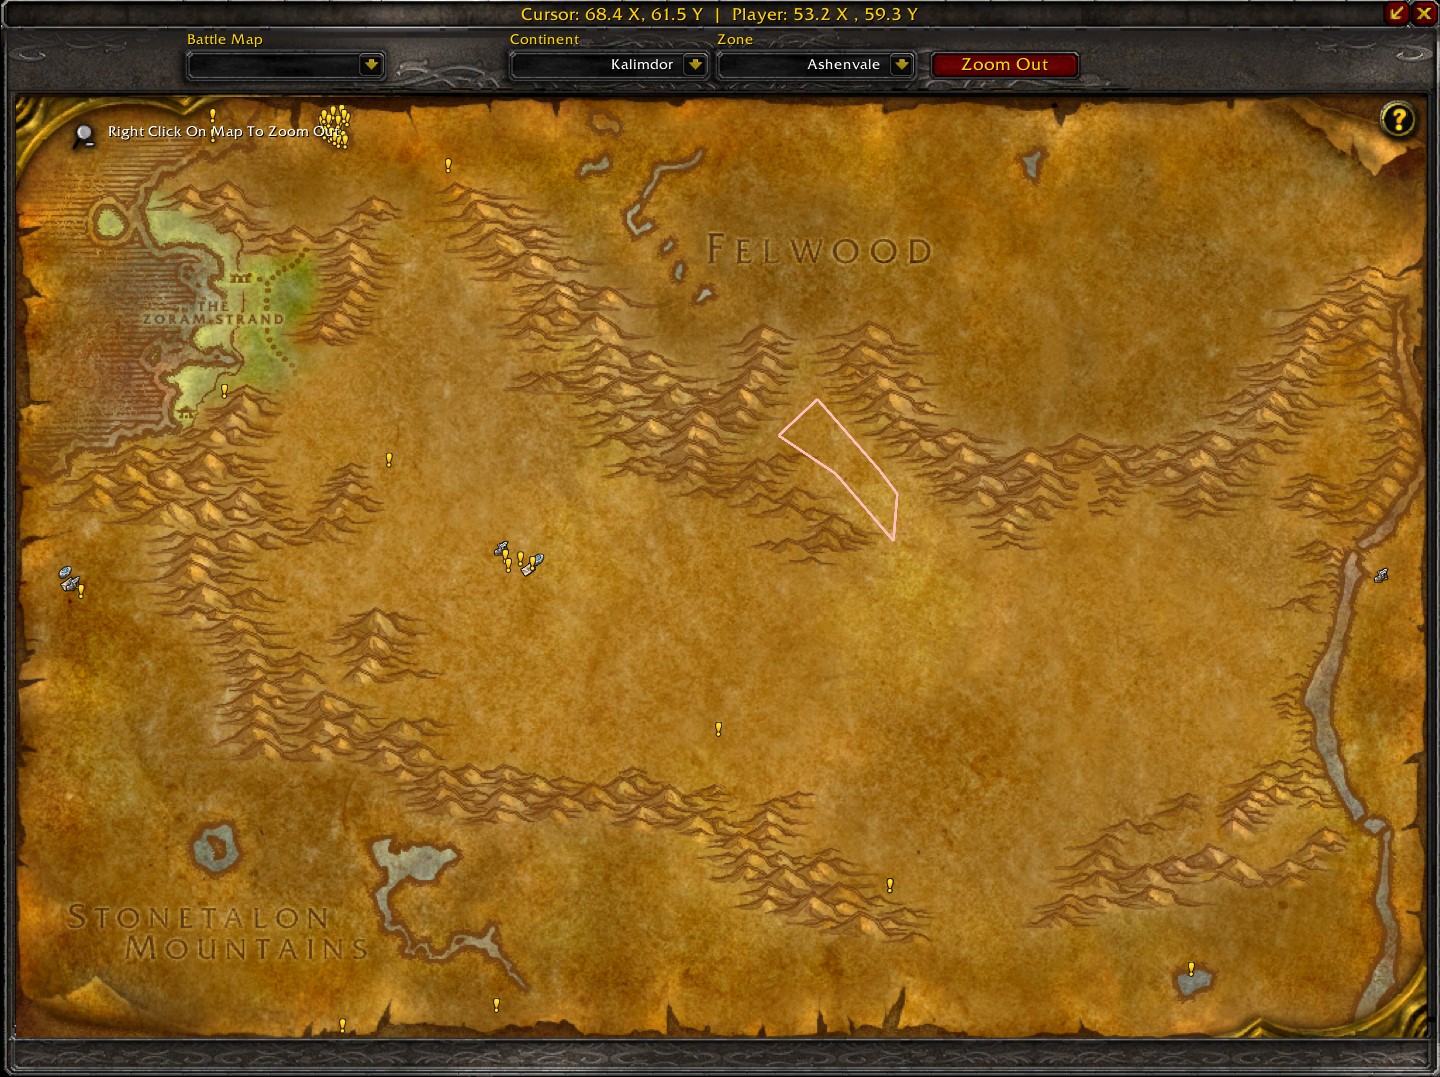 A map of the world of warcraft showing a route for heavy leather farming in ashenvale. The route starts at the flight point in astranaar and loops around the zone, passing through various areas with high concentrations of mobs that drop heavy leather, such as the zoram strand and felwood.